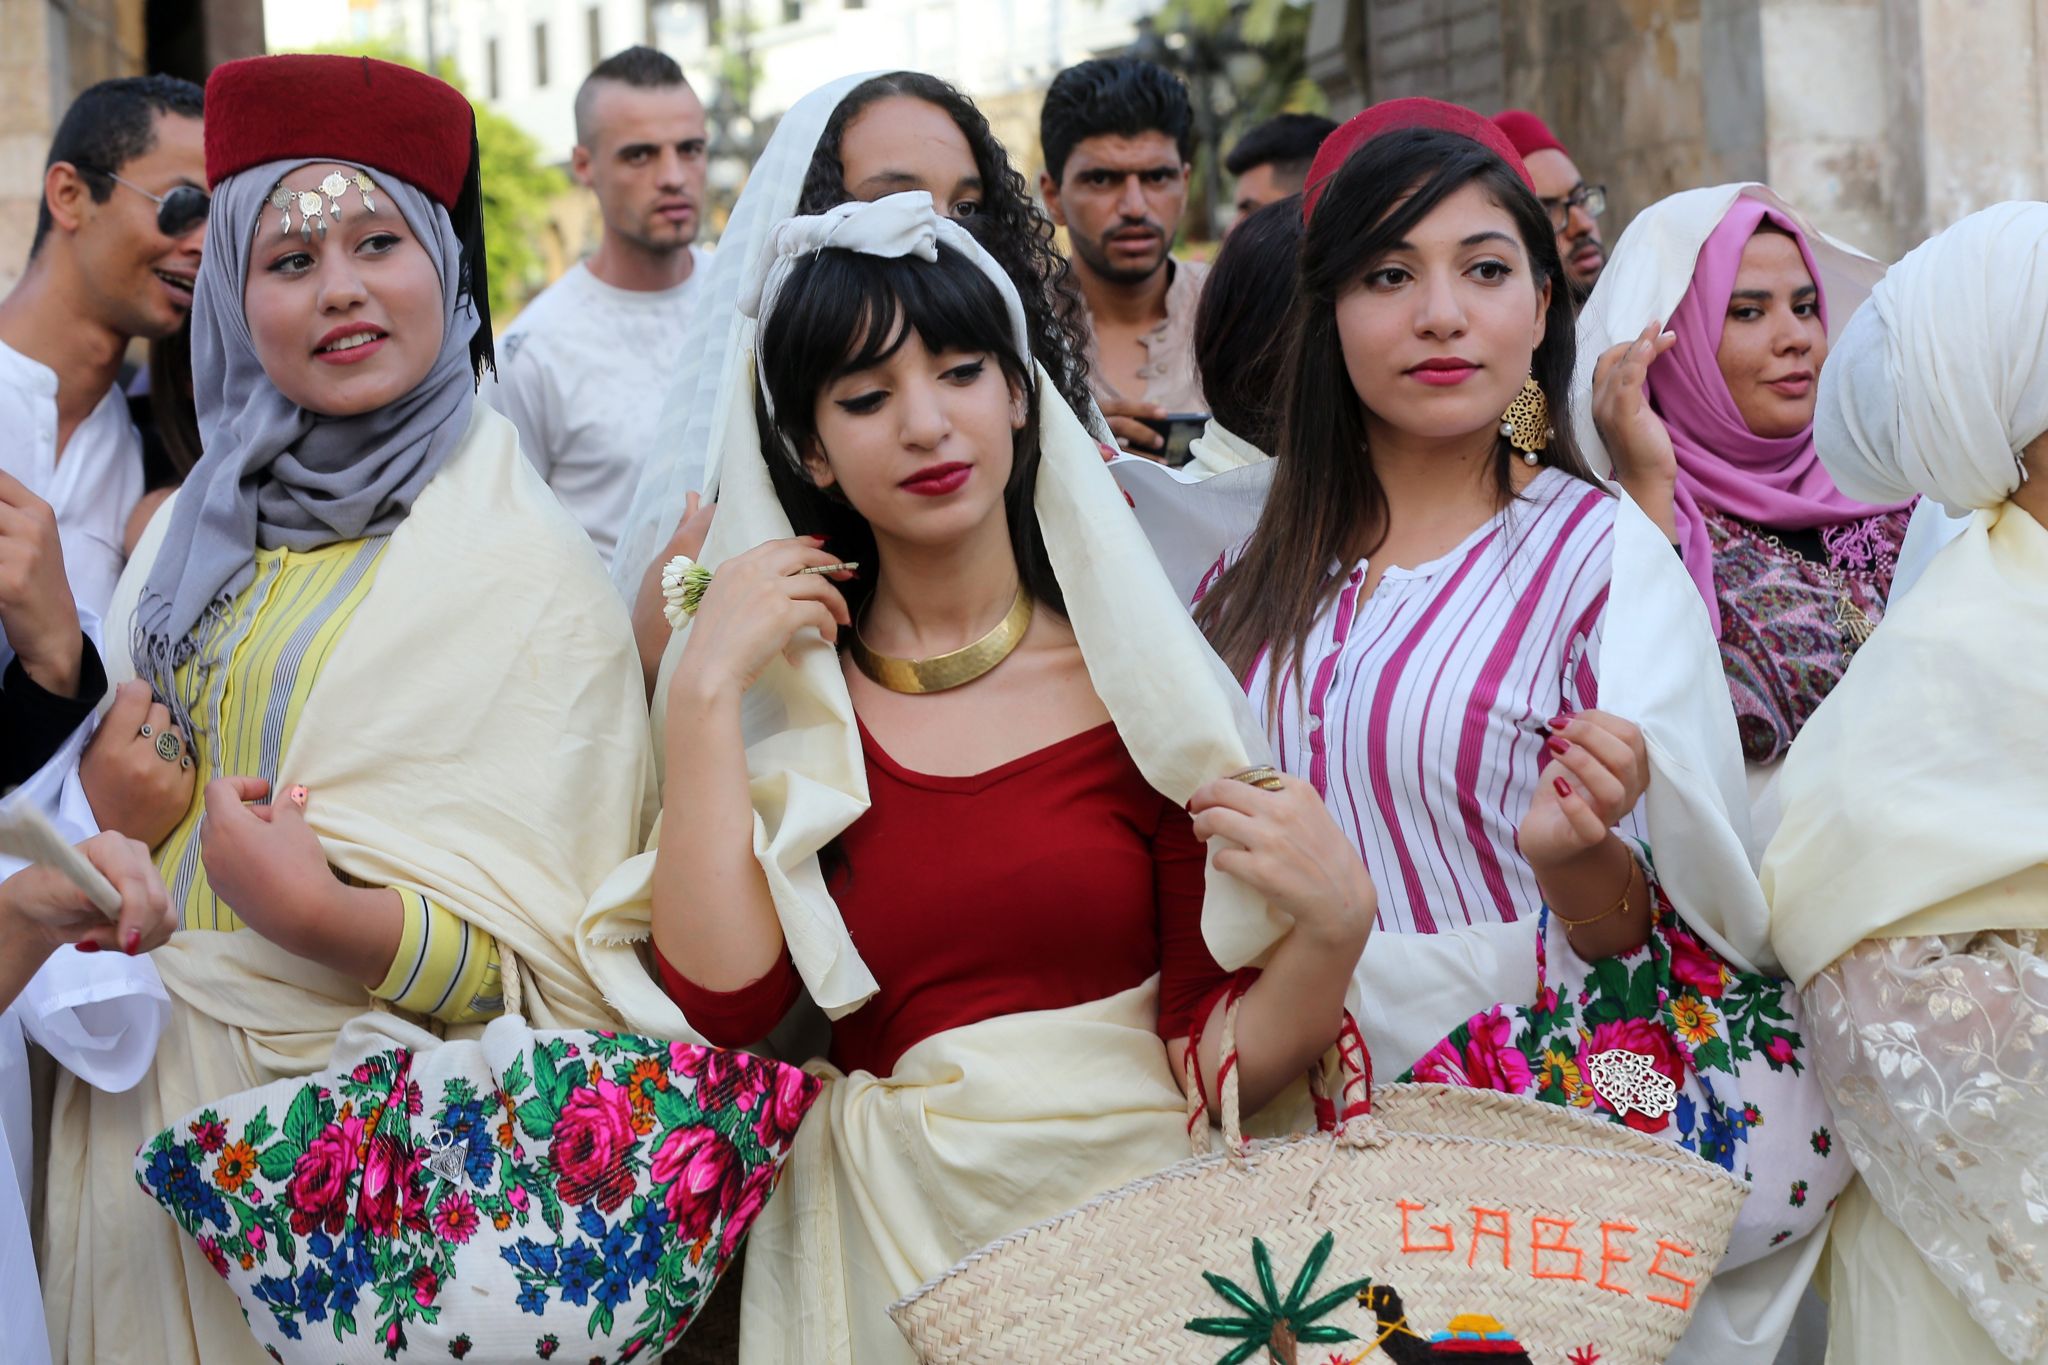 Tunisian women wearing traditional veils called "Sefseri" during the celebrations of the National Women"s Day and the 61th anniversary of the Personality Status Code in Tunis, Tunisia on 13 July 2017